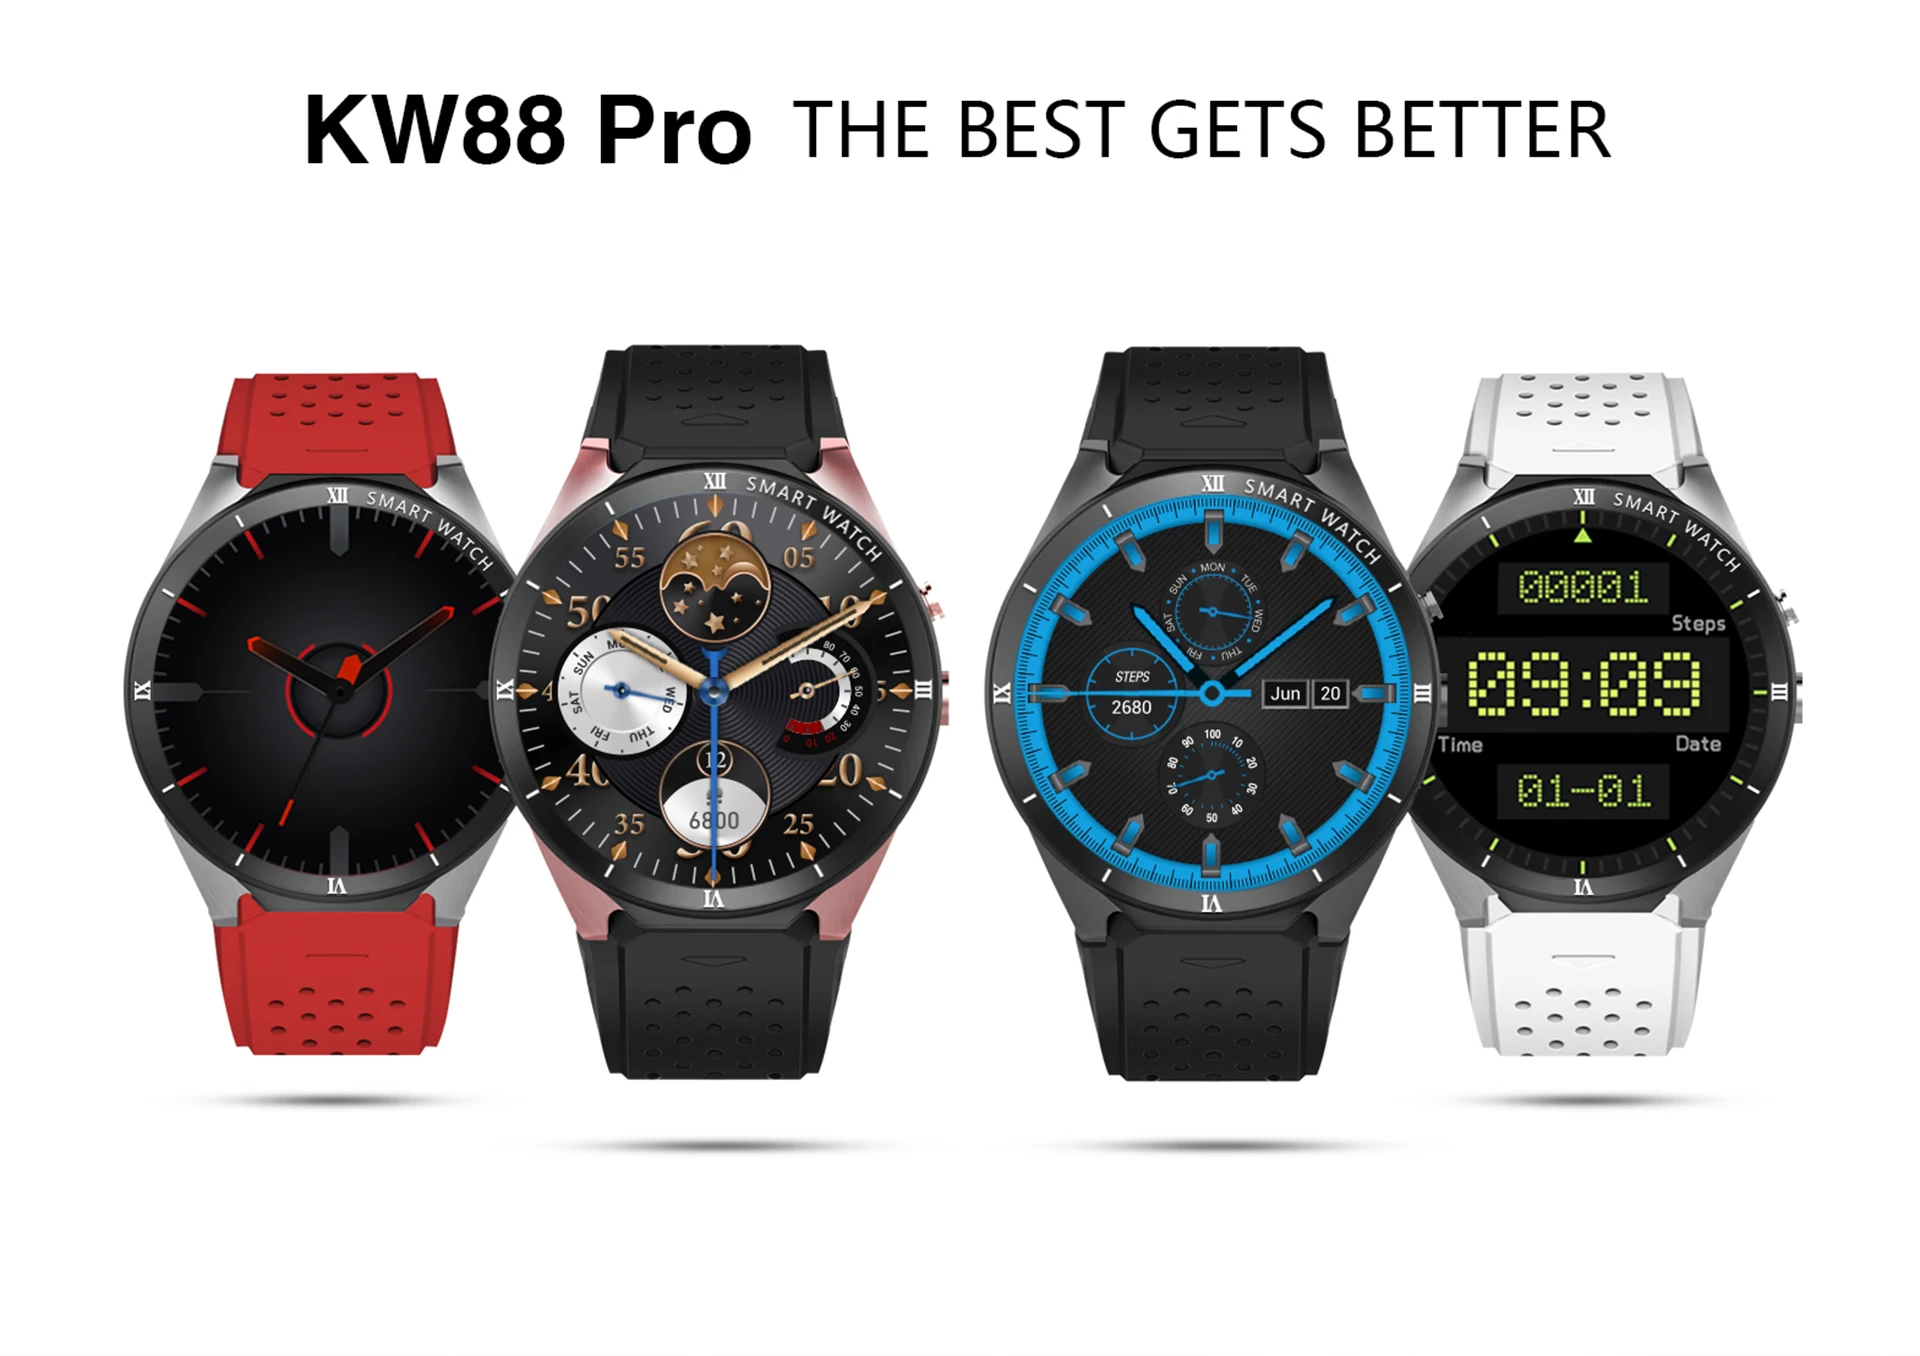 KOSPET KW88 PRO smartwatch phone Android 7.0 1GB 16GB 1.39" AMOLED screen Bluetooth 4.0 GPS Map Wearable Device Smart Watch men